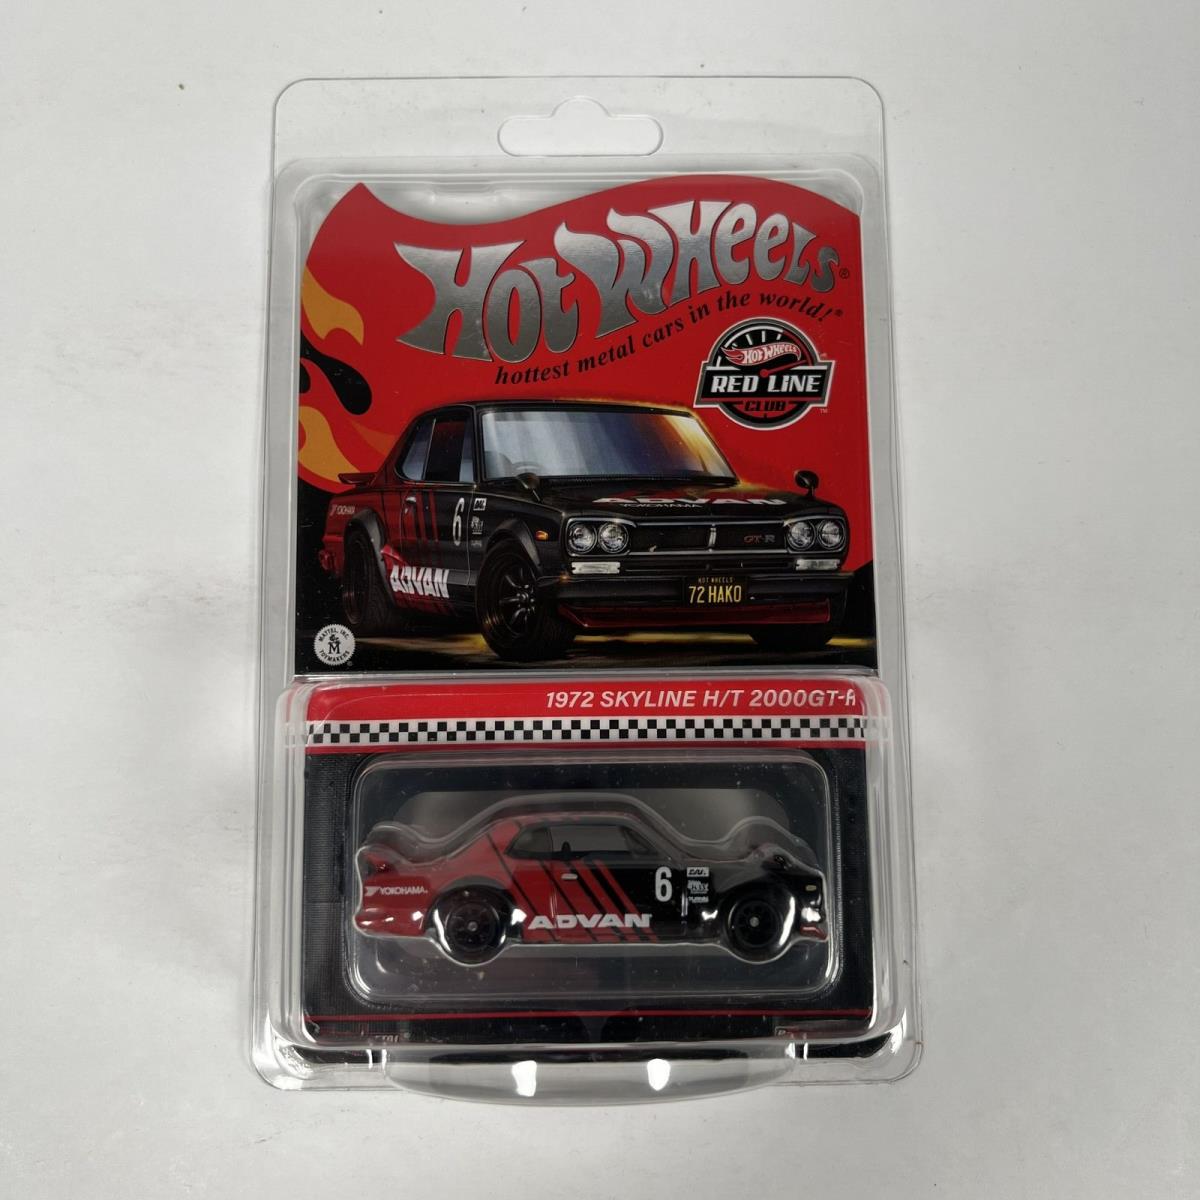 2024 Hot Wheels Rlc 1972 Skyline H/t 2000GT-R Advan Livery - IN Hand Ships Today